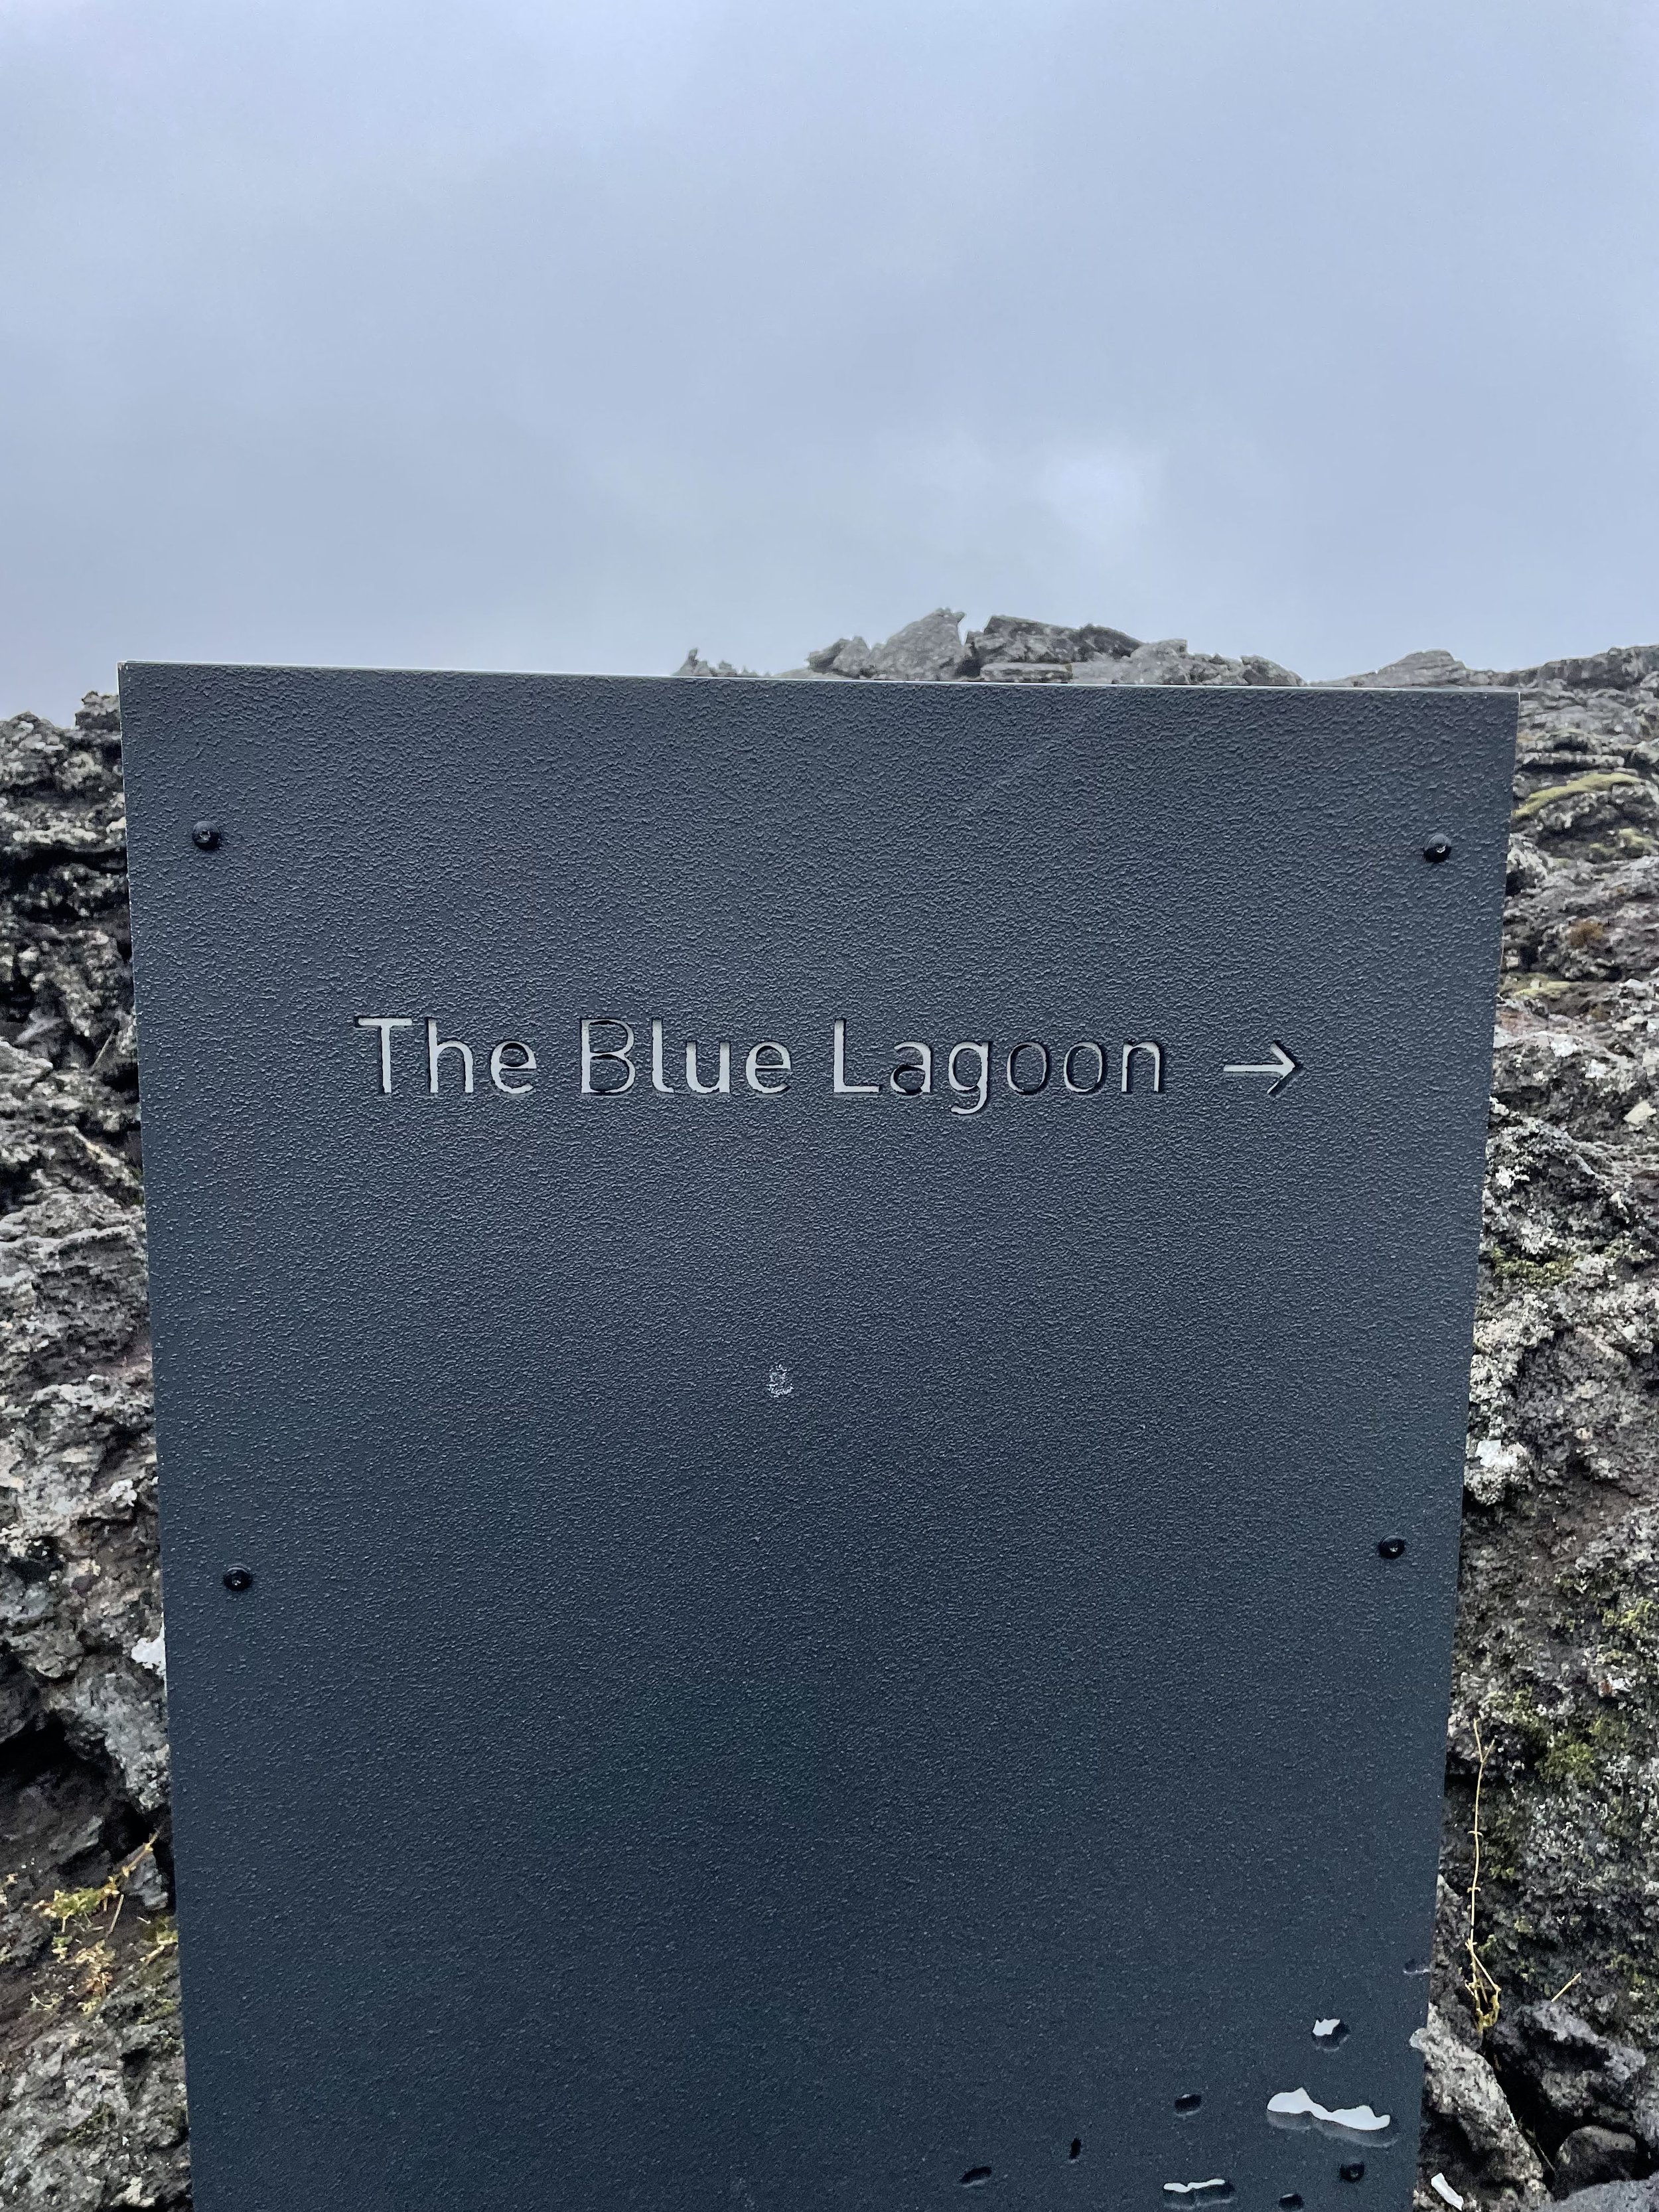 sign at BLUE LAGOON IN ICELAND